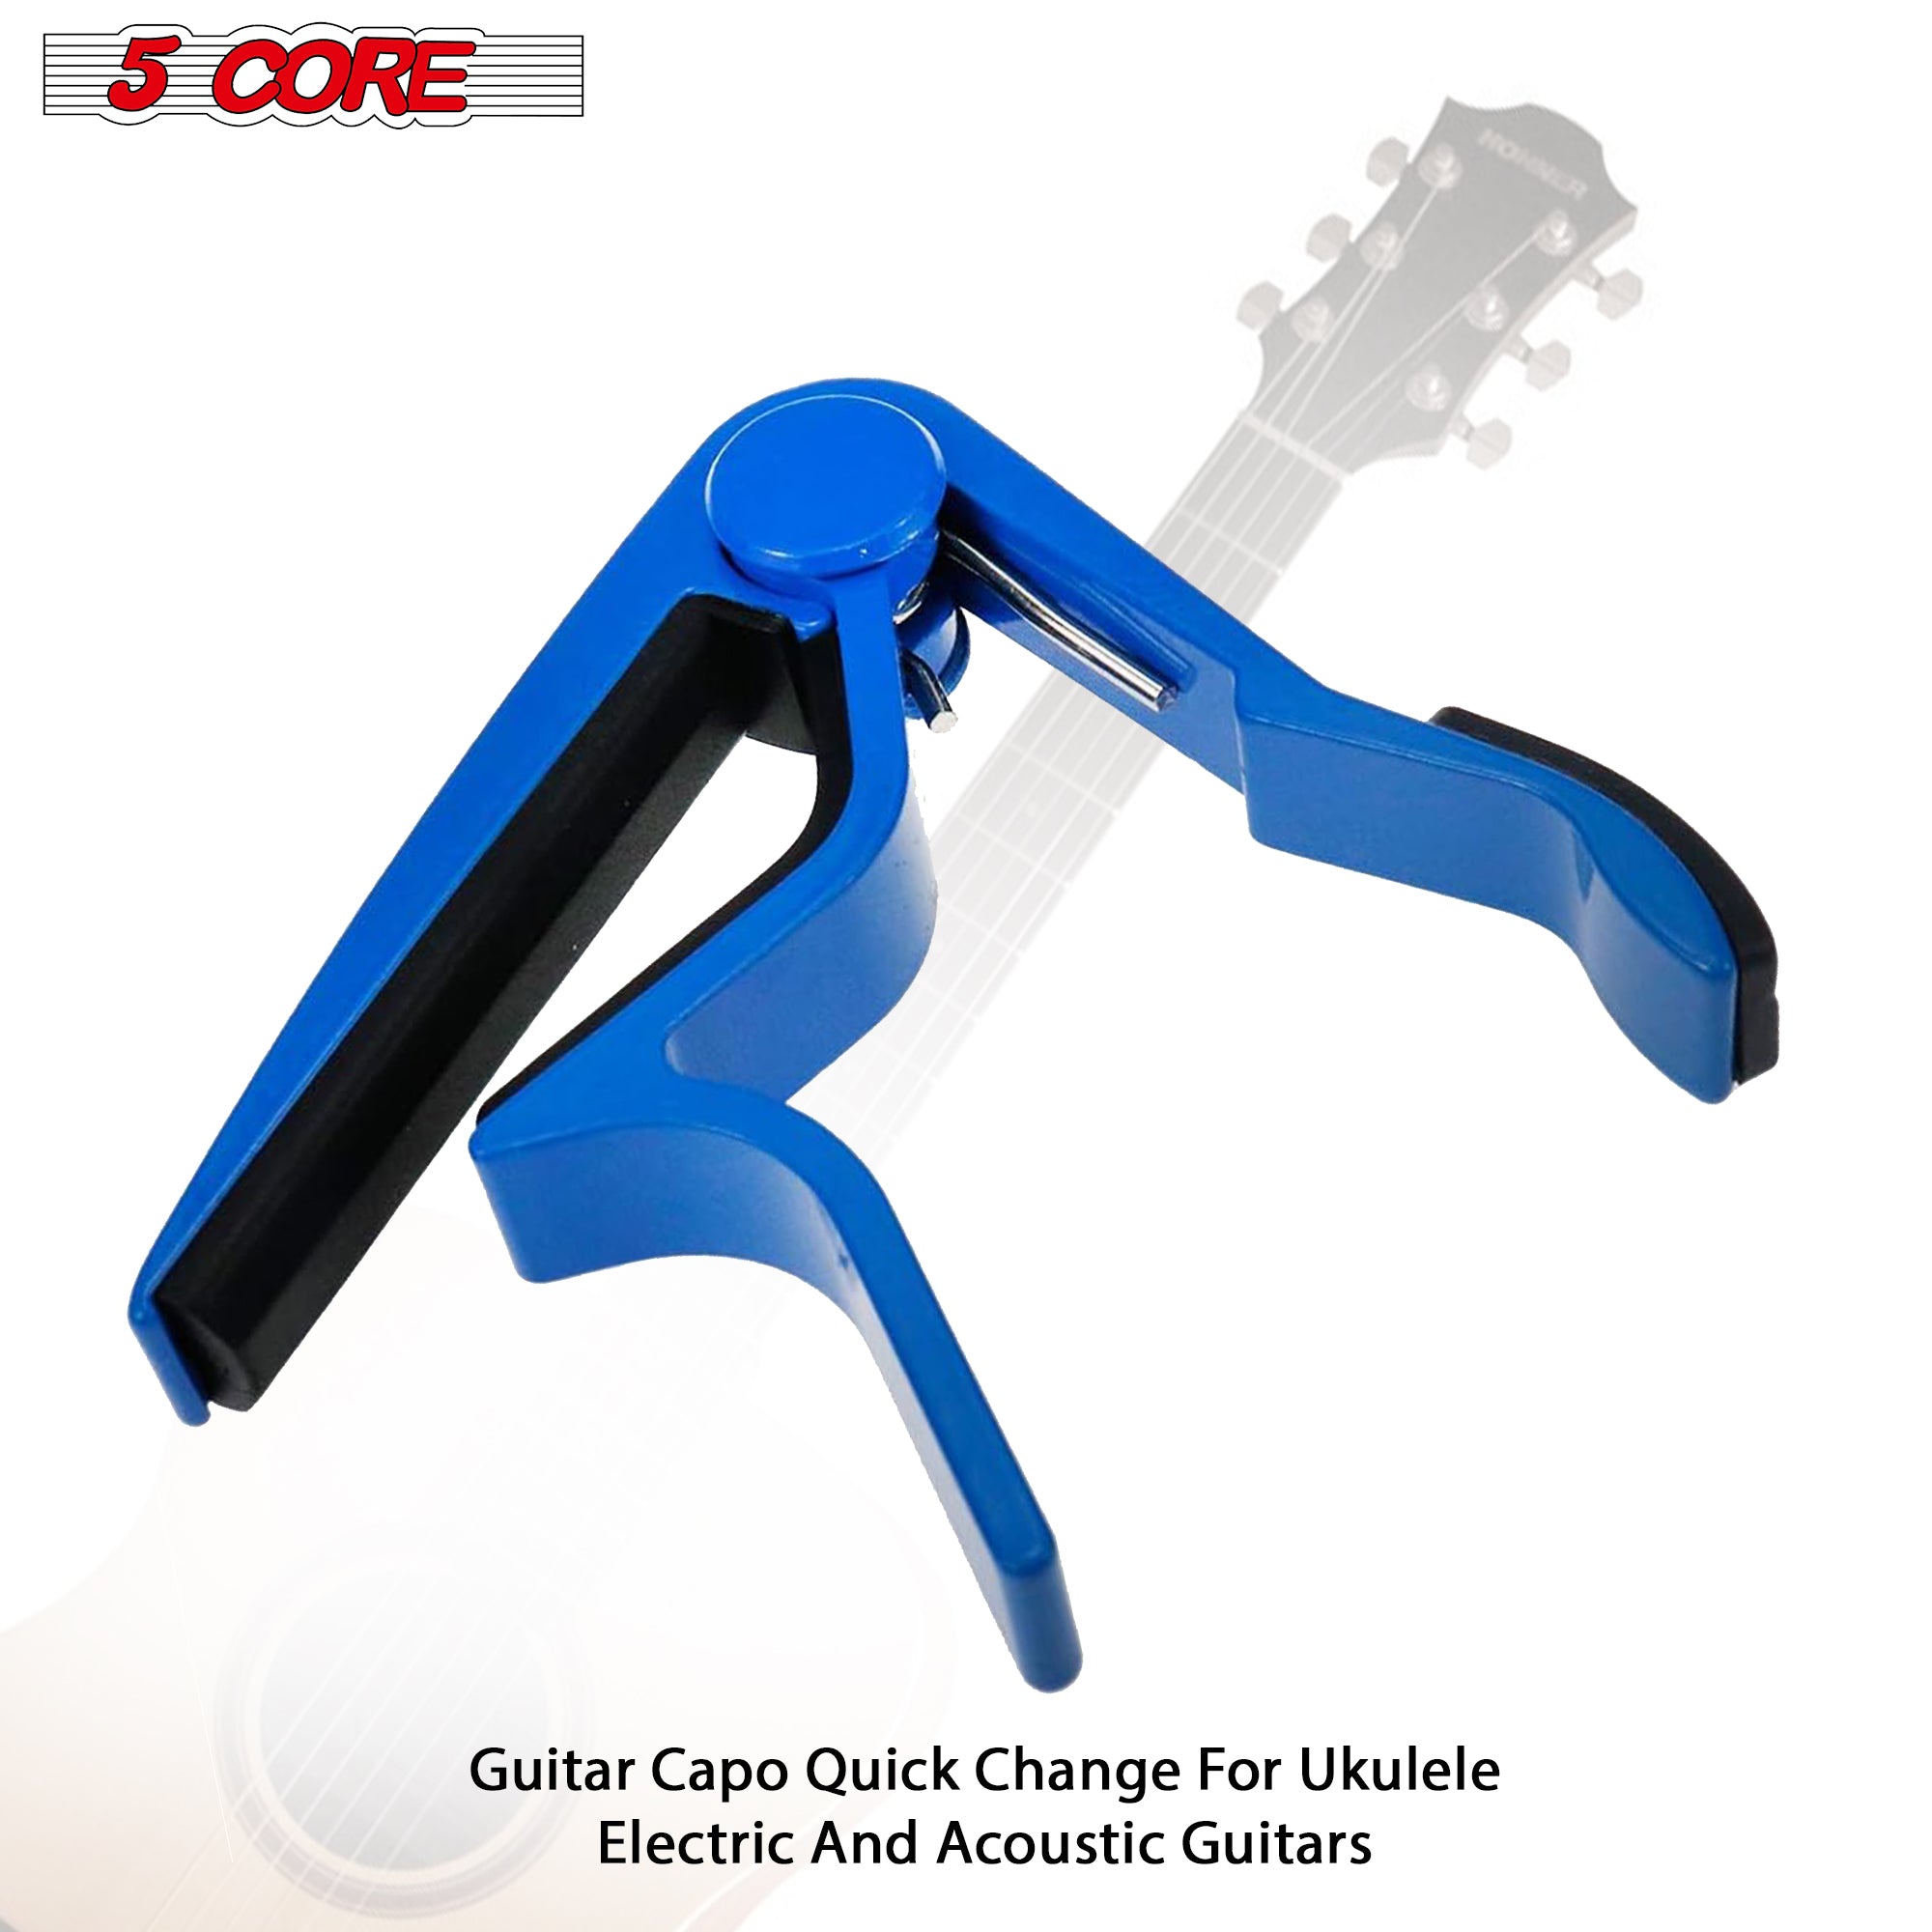 Close-up of a guitar capo in vibrant blue color, designed for easy string clamping.